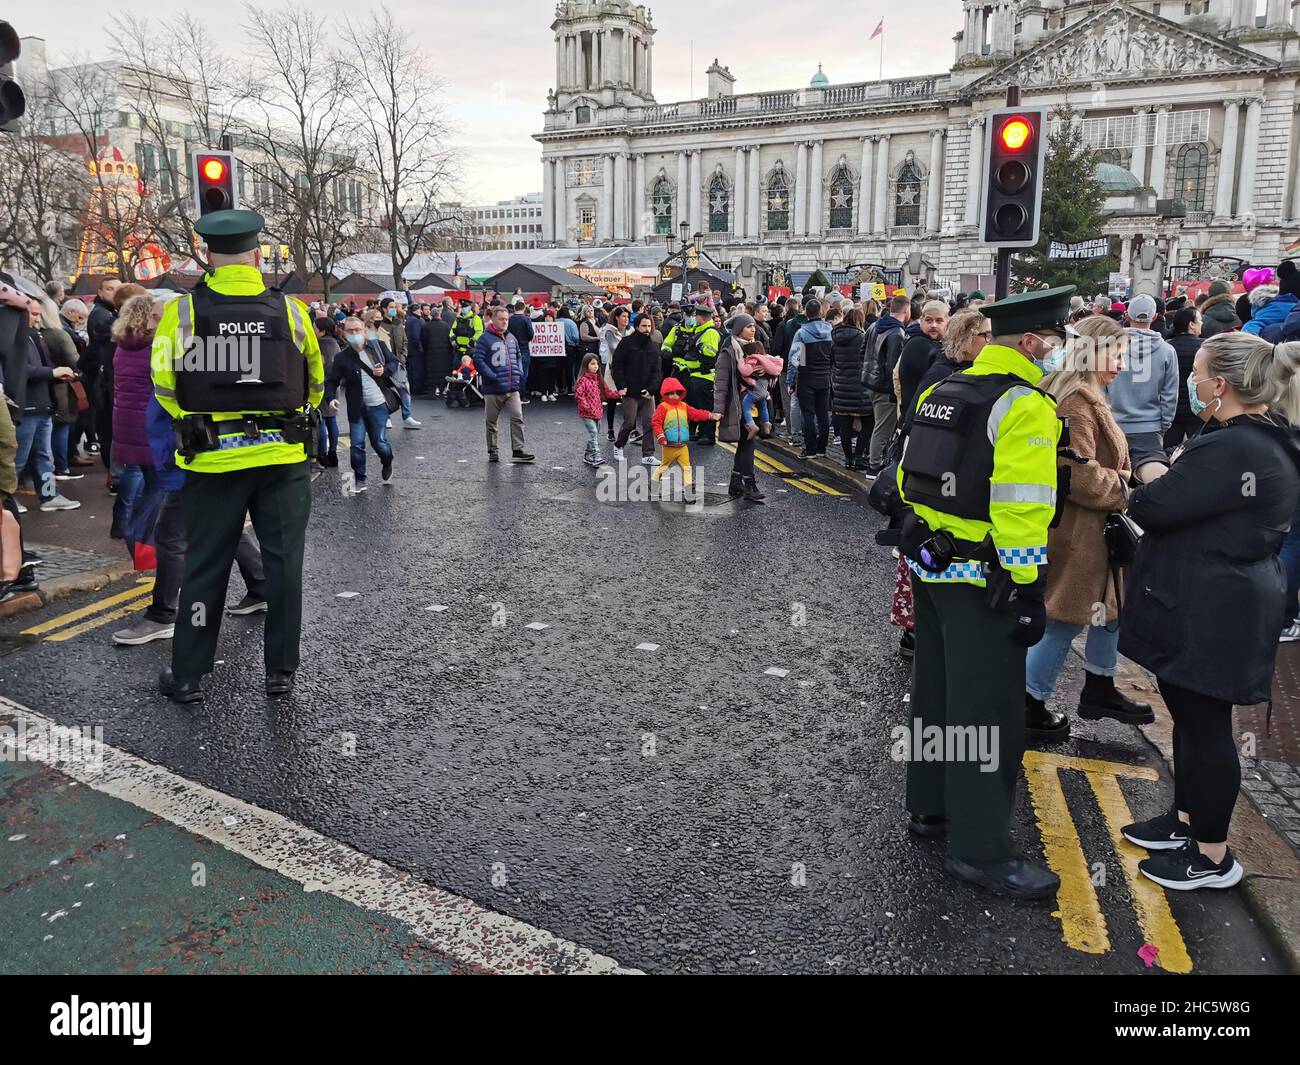 Anti-vaccination protesters in Belfast, Northern Ireland, UK Stock Photo